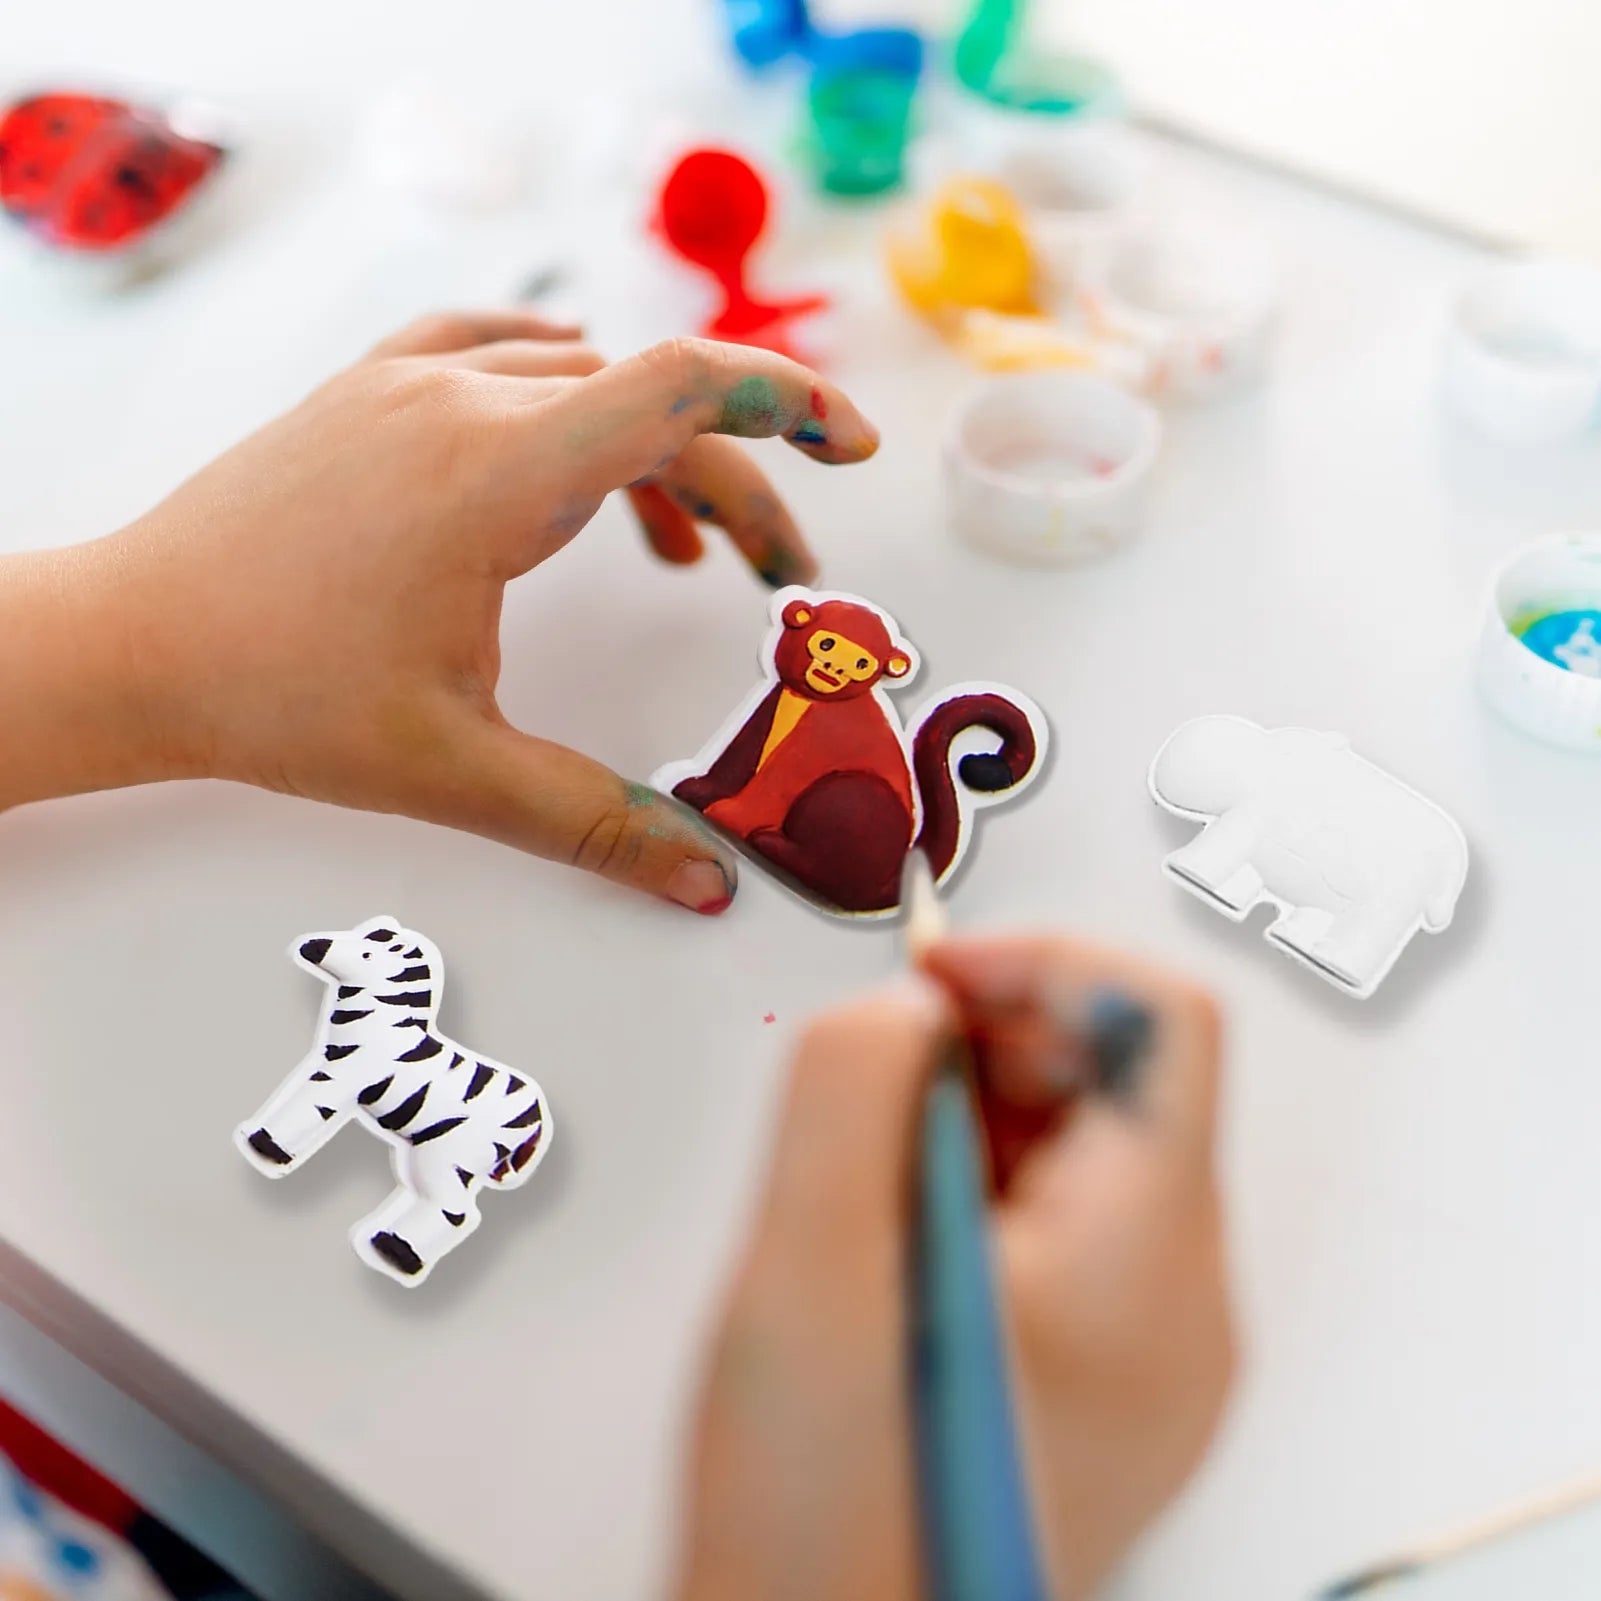 Paint Your Own Figurines with Magnet